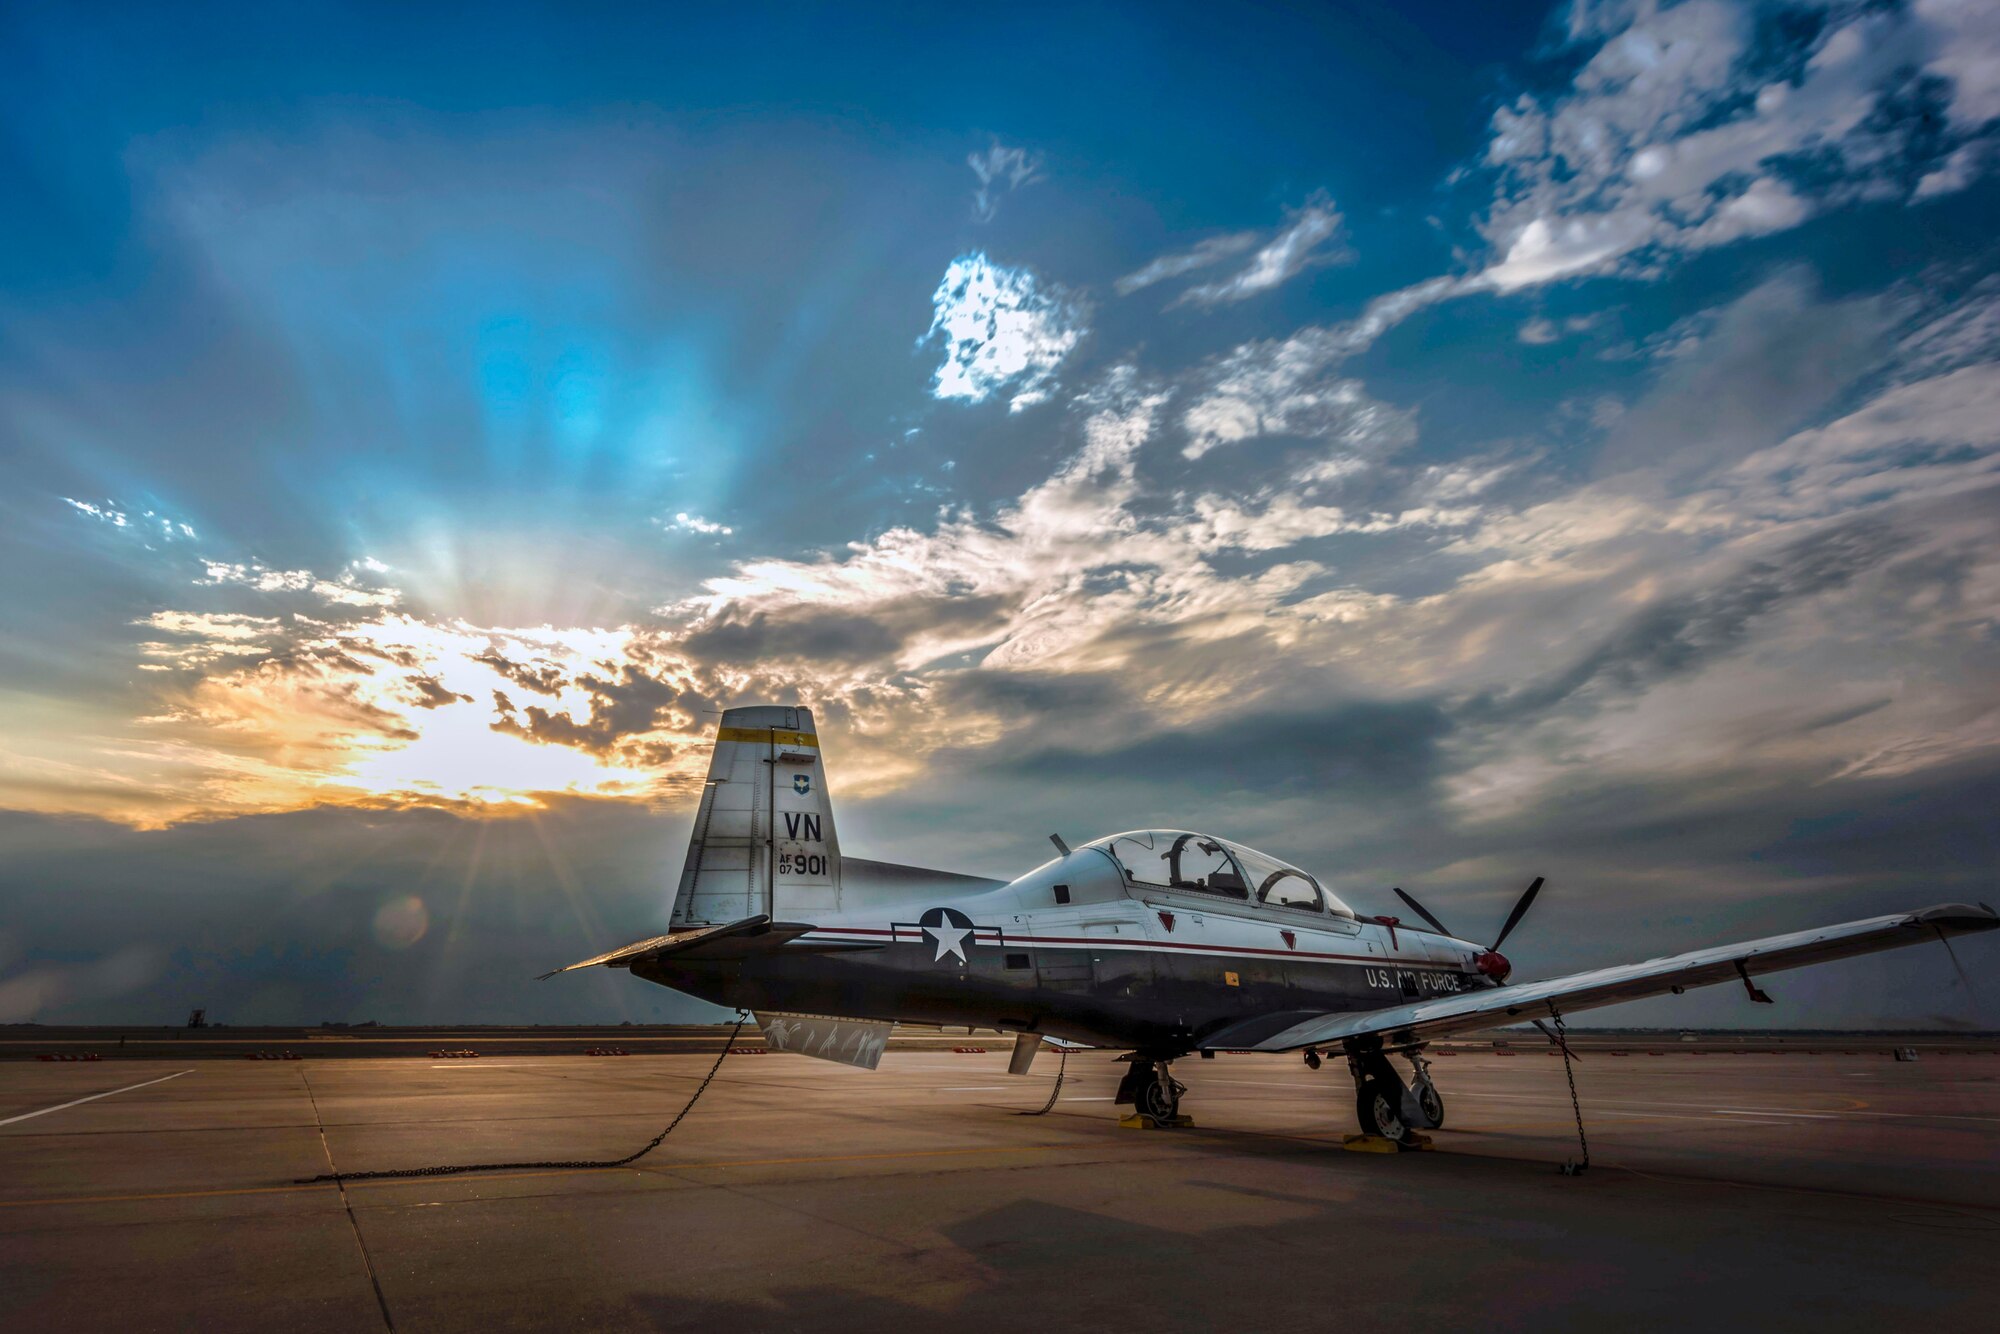 A T-6A Texan II is used to train specialized undergraduate pilots at Vance Air Force Base, Okla., April 24, 2018. The Texan has a thrust-to-weight ratio that allows the aircraft to perform an initial climb of 3,100 feet per minute and reach a height of 18,000 feet in less than six minutes. (U.S. Air Force photo by Erik Cardenas)